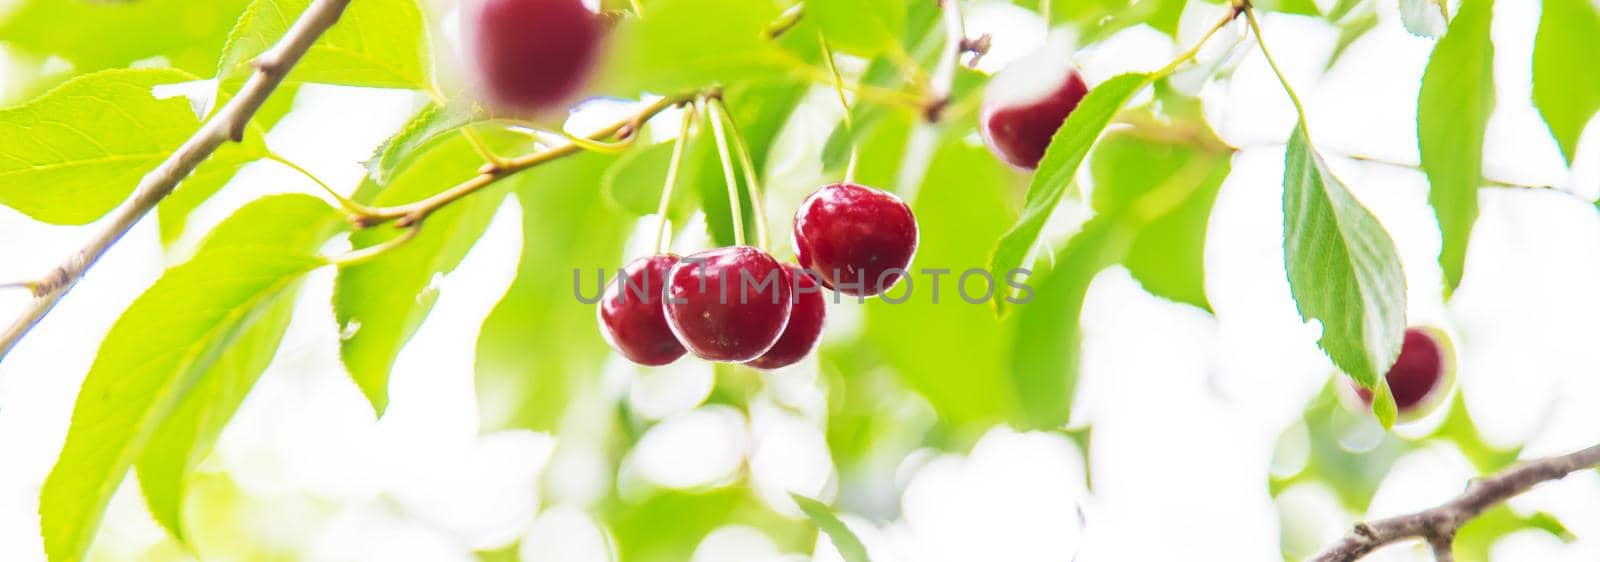 cherry on a tree in the garden. Selective focus. by mila1784